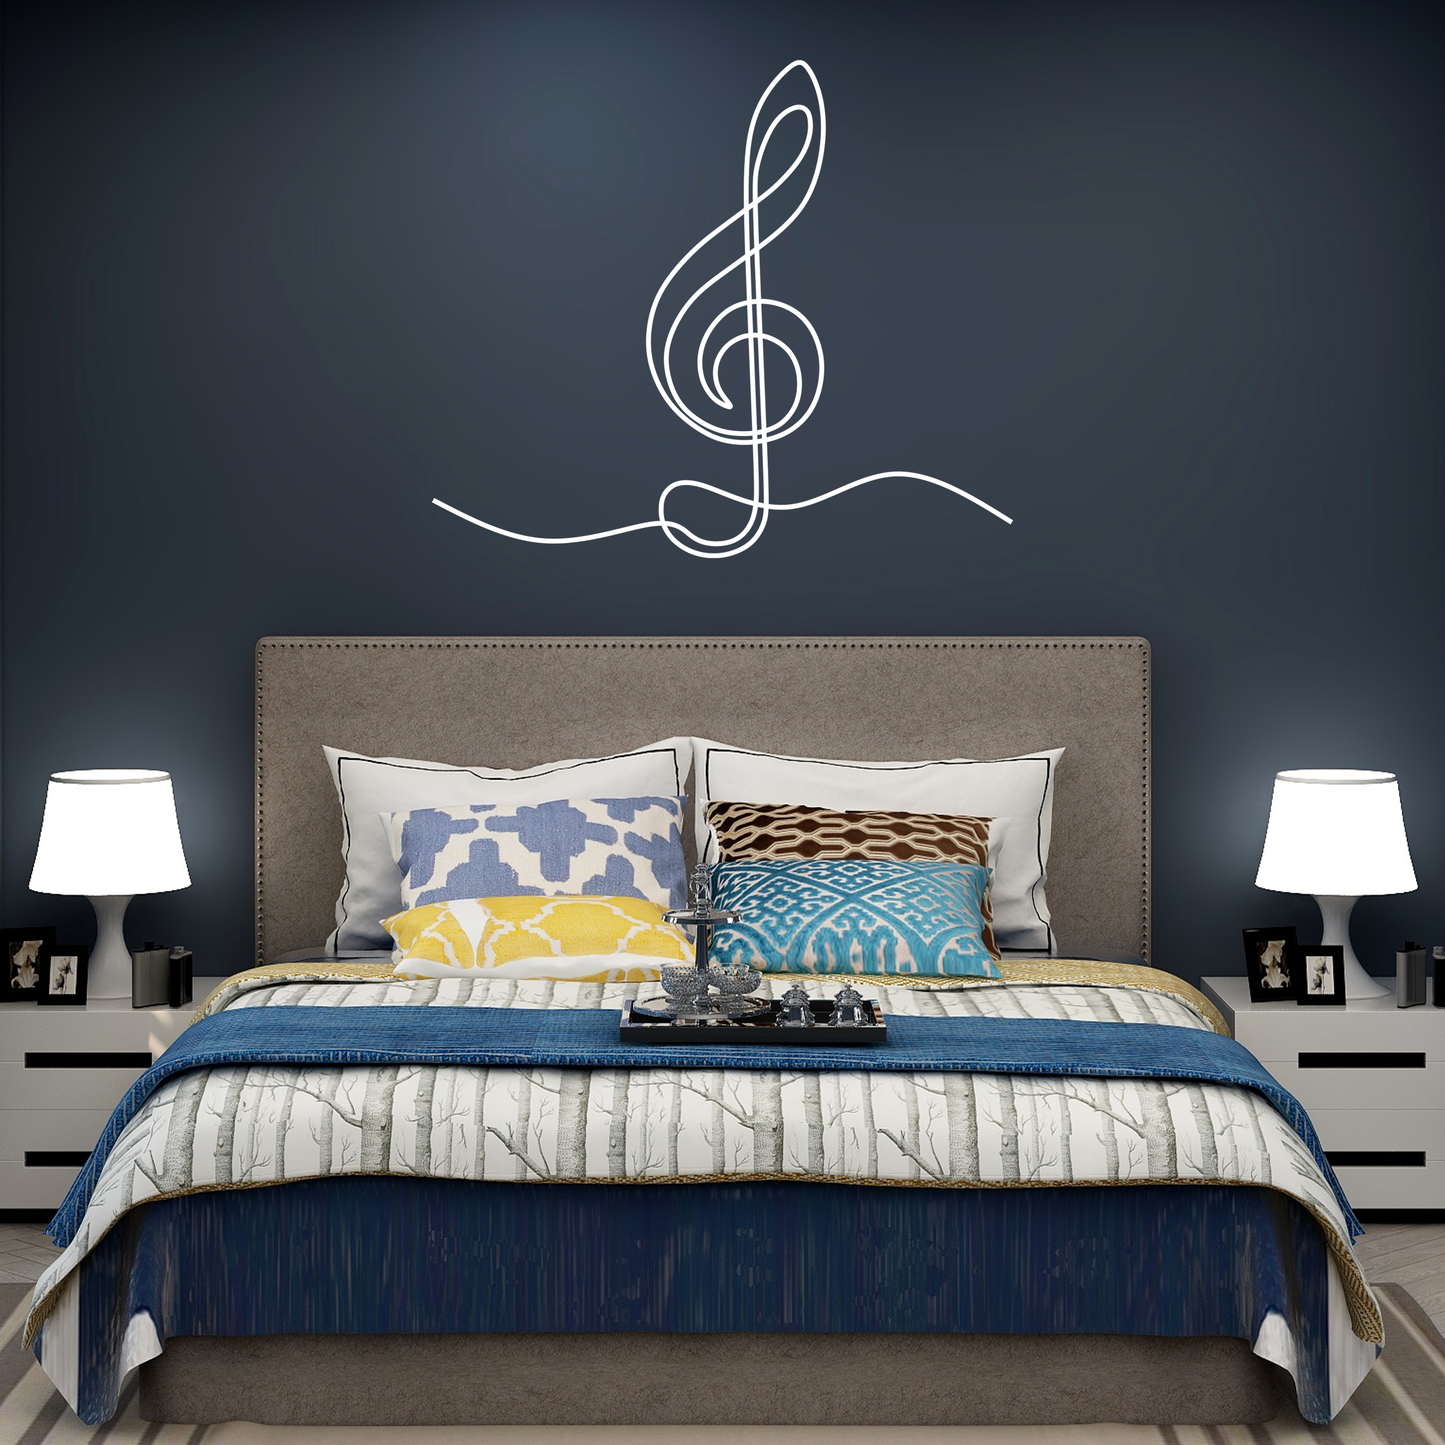 Clef Continuous Wall Sticker Decal